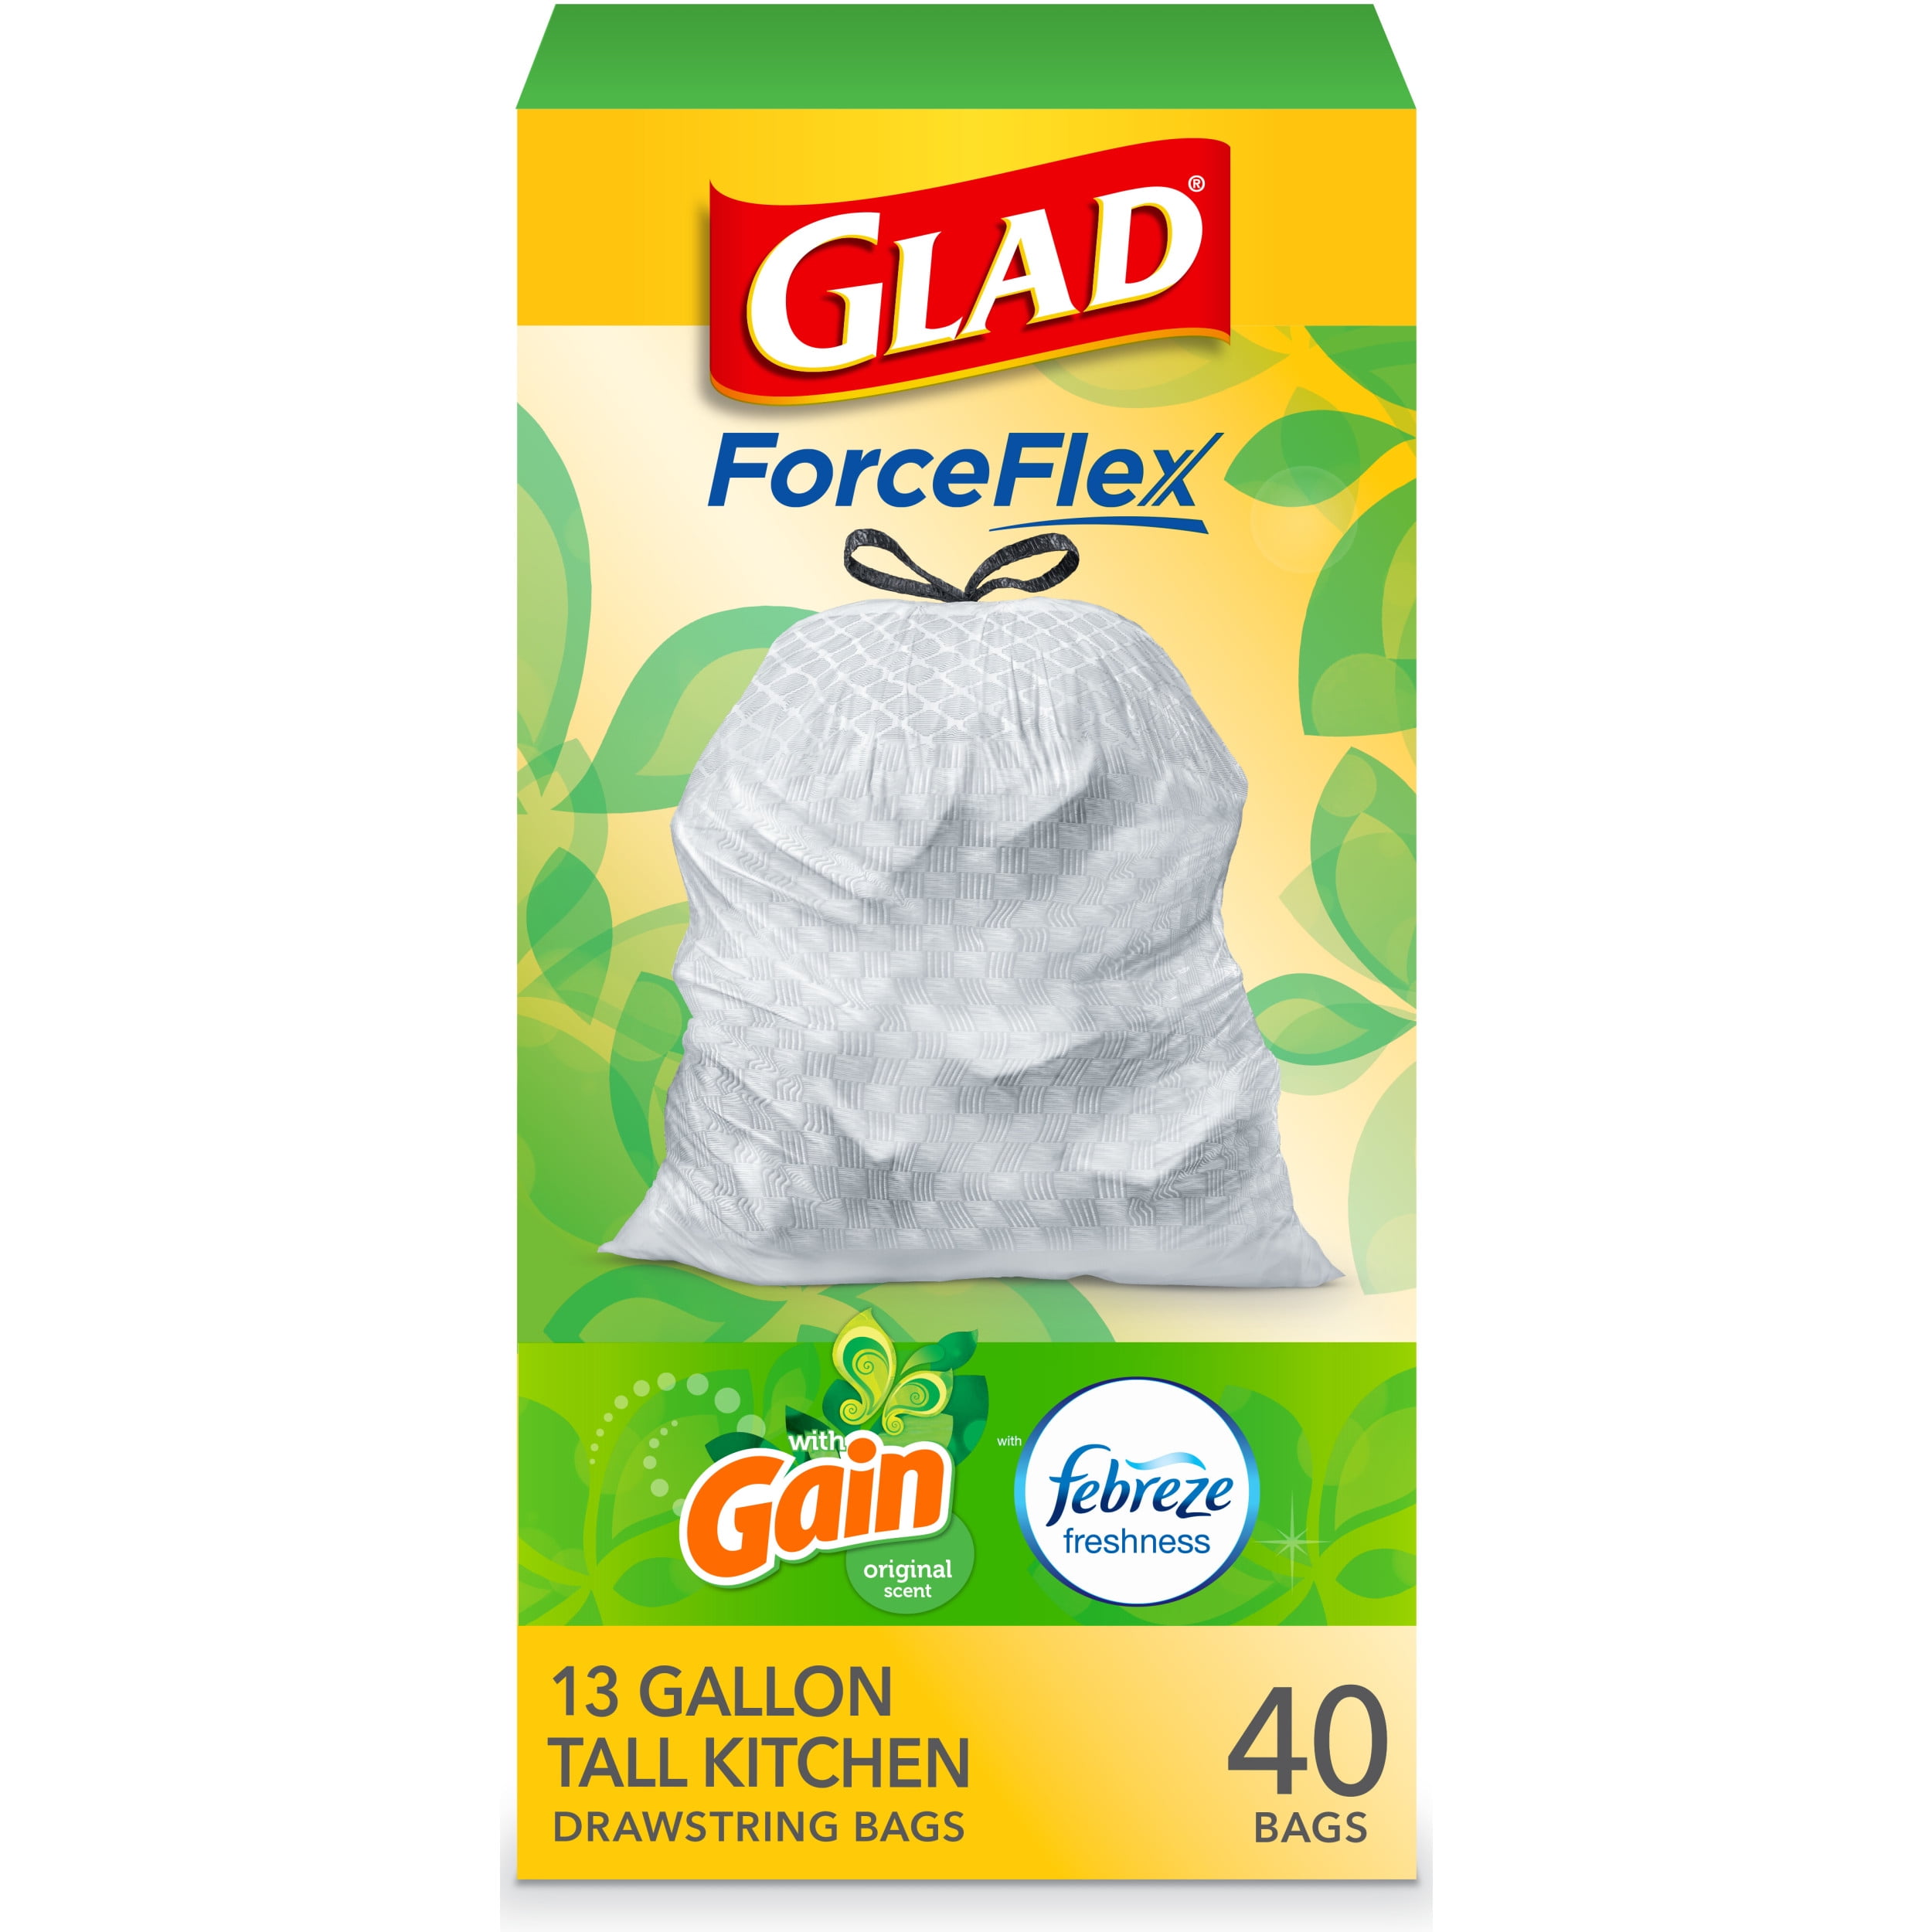 Glad ForceFlex MaxStrength Tall Kitchen Drawstring Trash Bags, 13 Gallon,  Fresh Clean Scent with Febreze Freshness, 34 Count